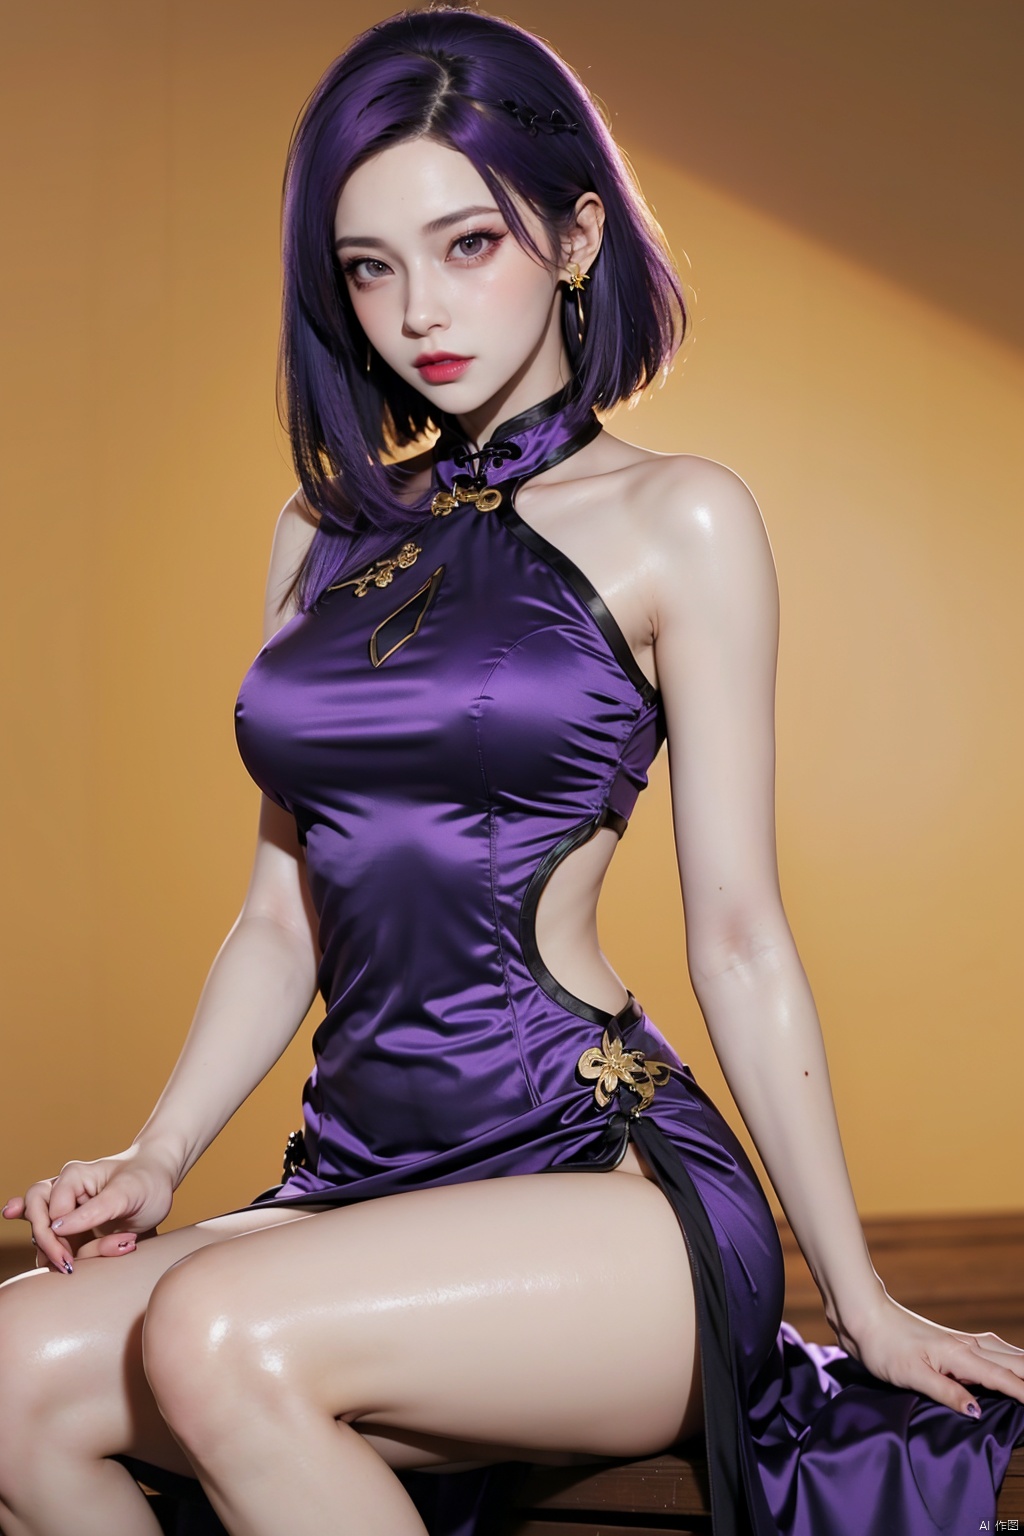 Masterpiece, Ultra HD, Best, (Wallpaper: 1.1), 8K, High Detail Skin, Super Detail, High Resolution, Perfect Detail Face, Shining Skin, 1Girl, Solo, (Perfect Anatomy: 1.3), (Perfect Ratio: 1.3) Perfect Body, Full Hair, Perfect Nails, Perfect Legs, Mid Breast Crevice, Purple Cheongsam/Golden Pattern,Gold earrings, long hair/black,Sitting/live streaming in front of the camera,purple hair/Short hair